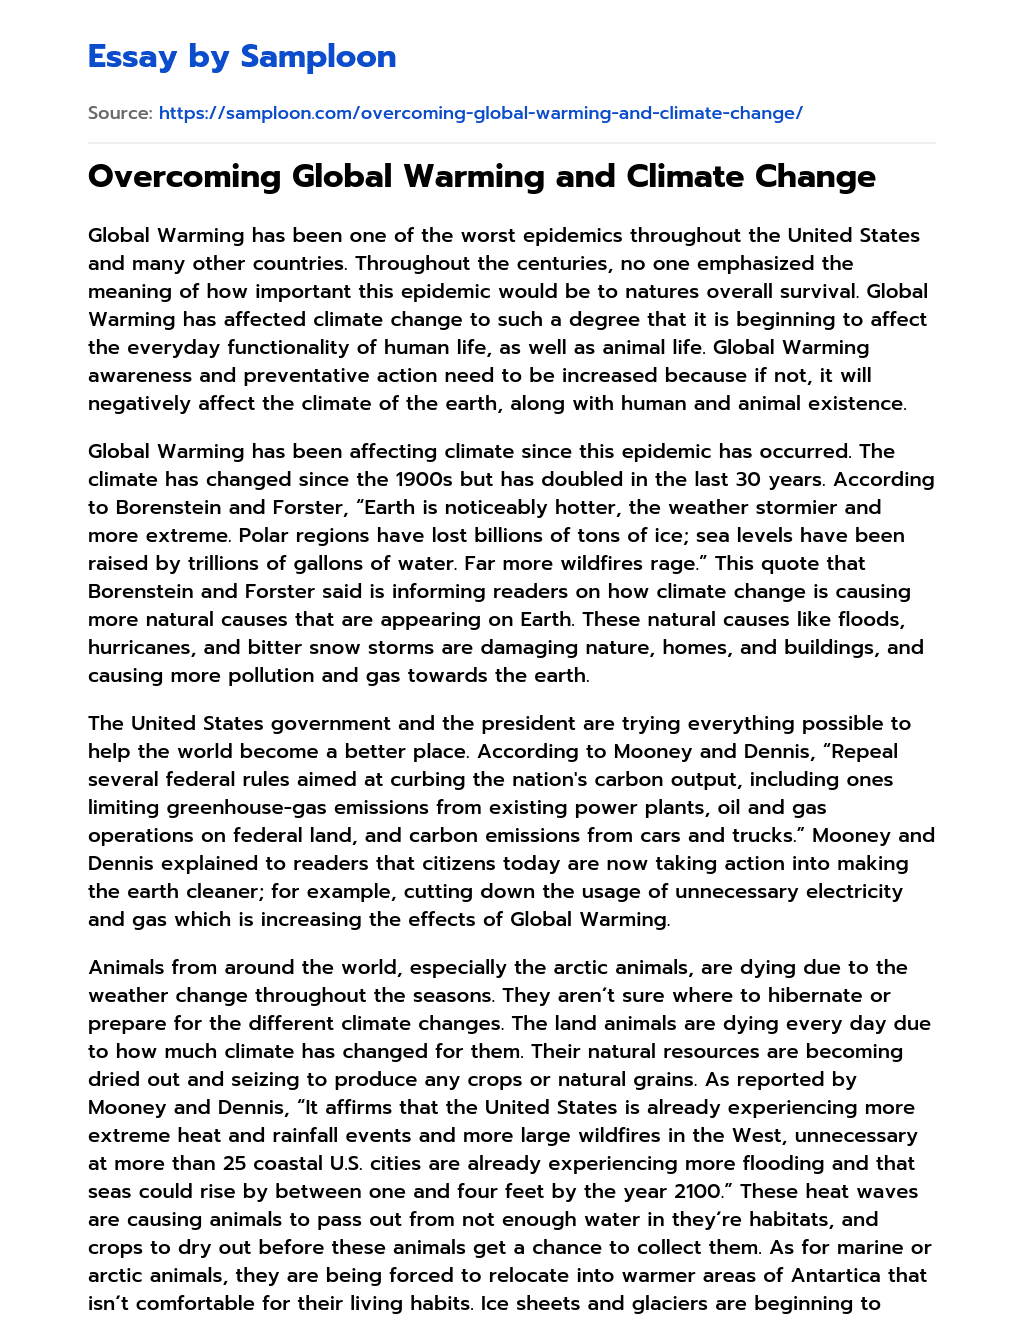 global warming a threat to life essay